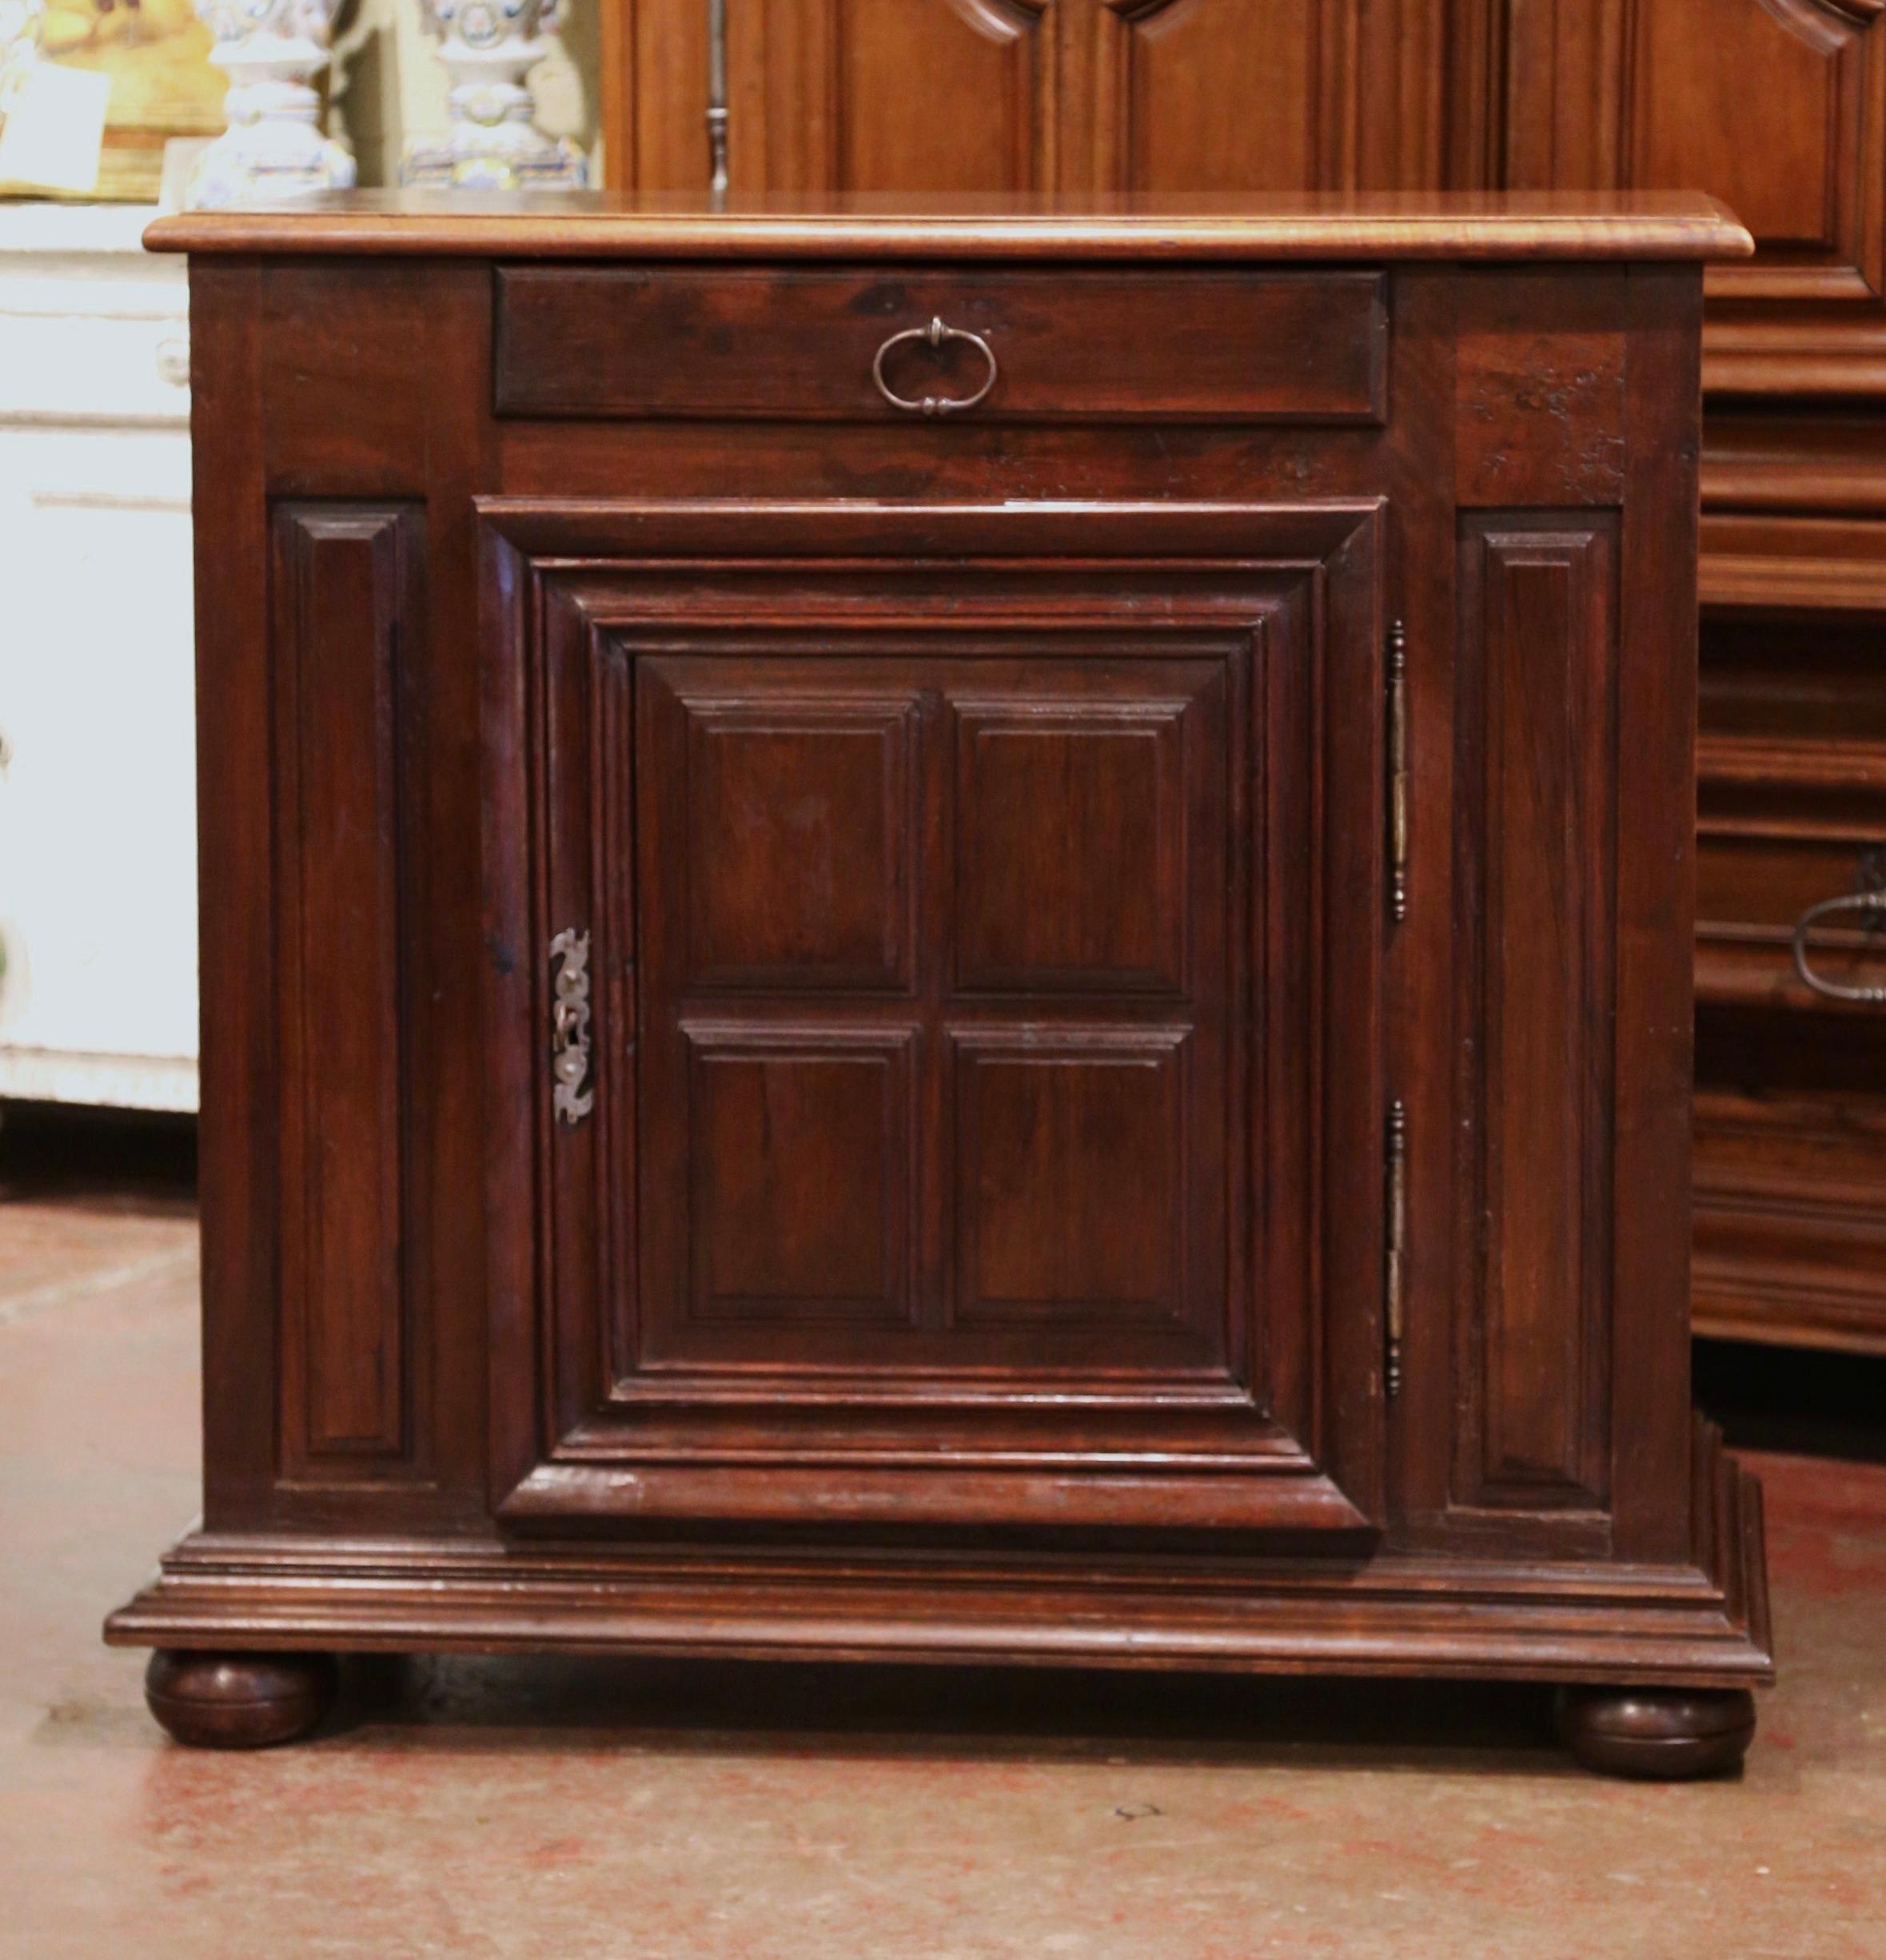 This elegant antique jelly cabinet was crafted in southern France, circa 1880. Standing on bun feet over a molded plinth base, the provincial confiturier is fitted with a single drawer with iron pull over a raised paneled center door. The inside has